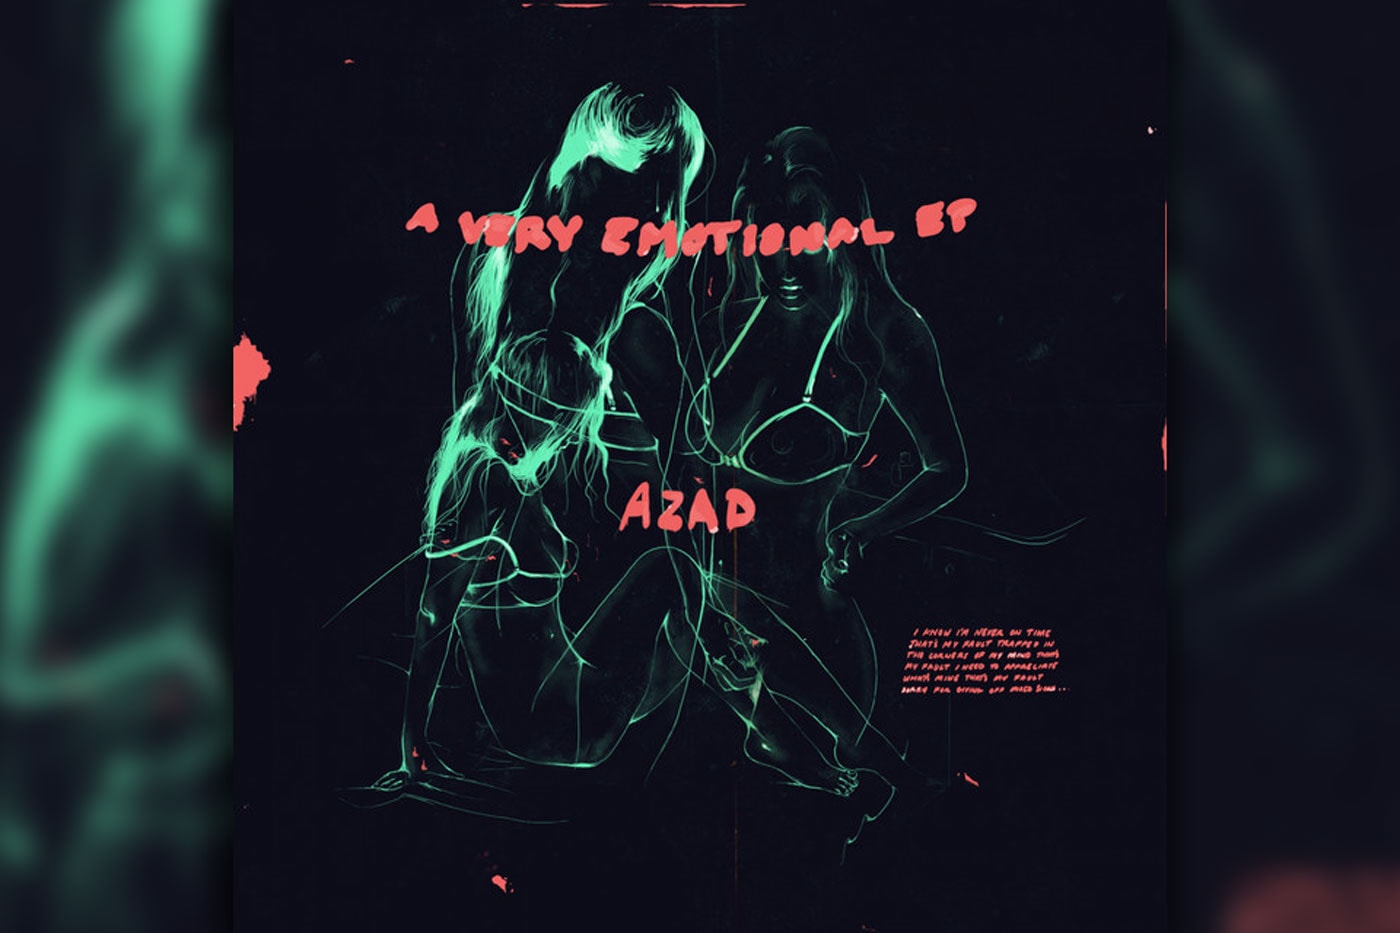 Stream Azad's New Project, 'A Very Emotional EP' Sango, Atu, Dpat, Stwo, HUCCI